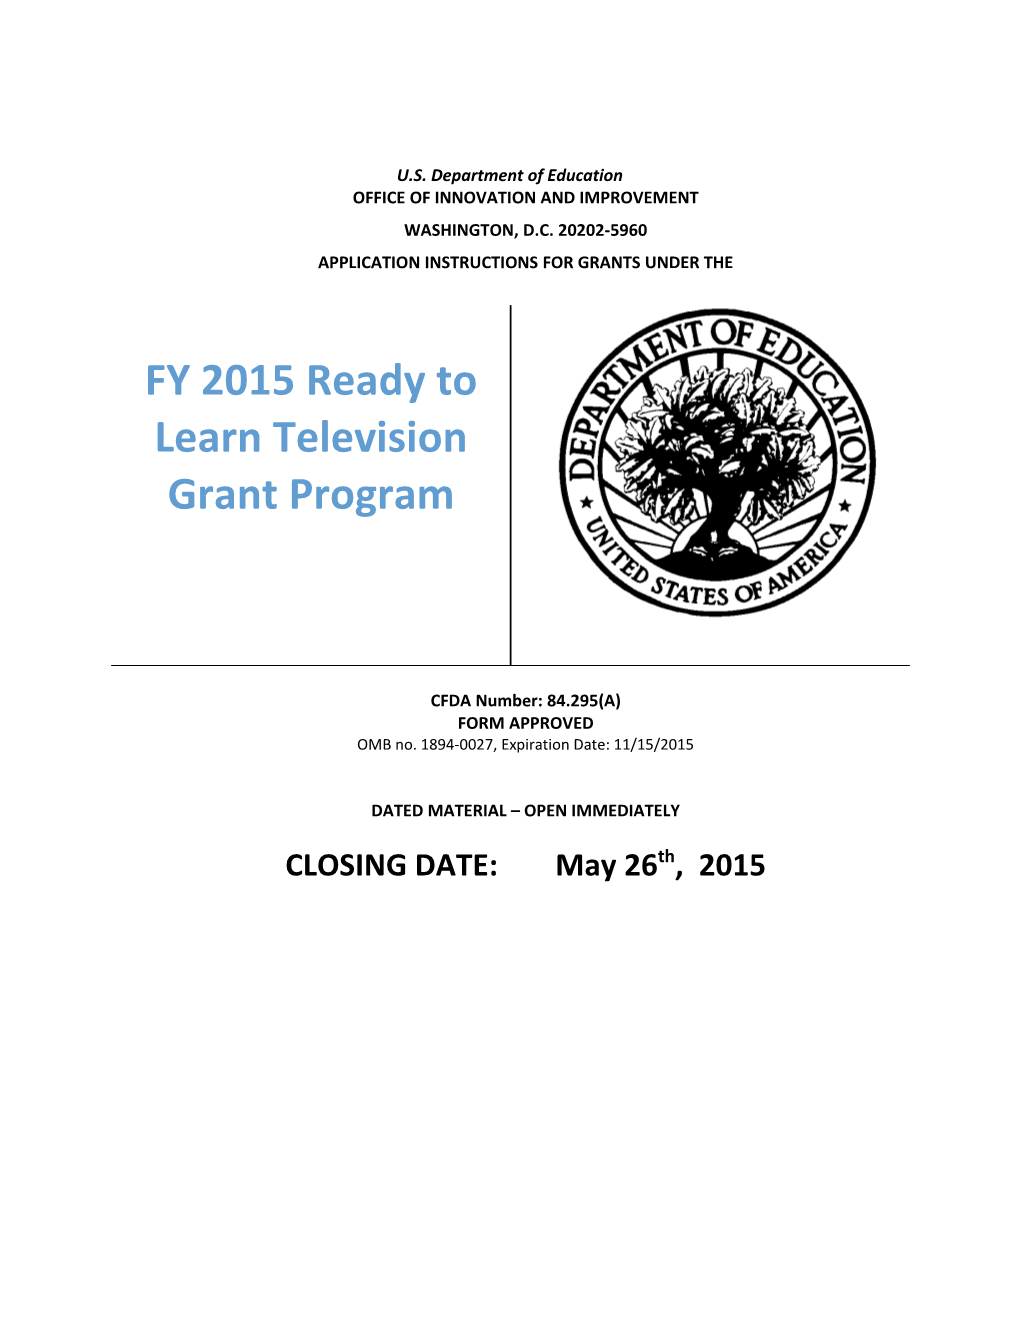 FY 2015 Ready to Learn Application Package (MS Word)